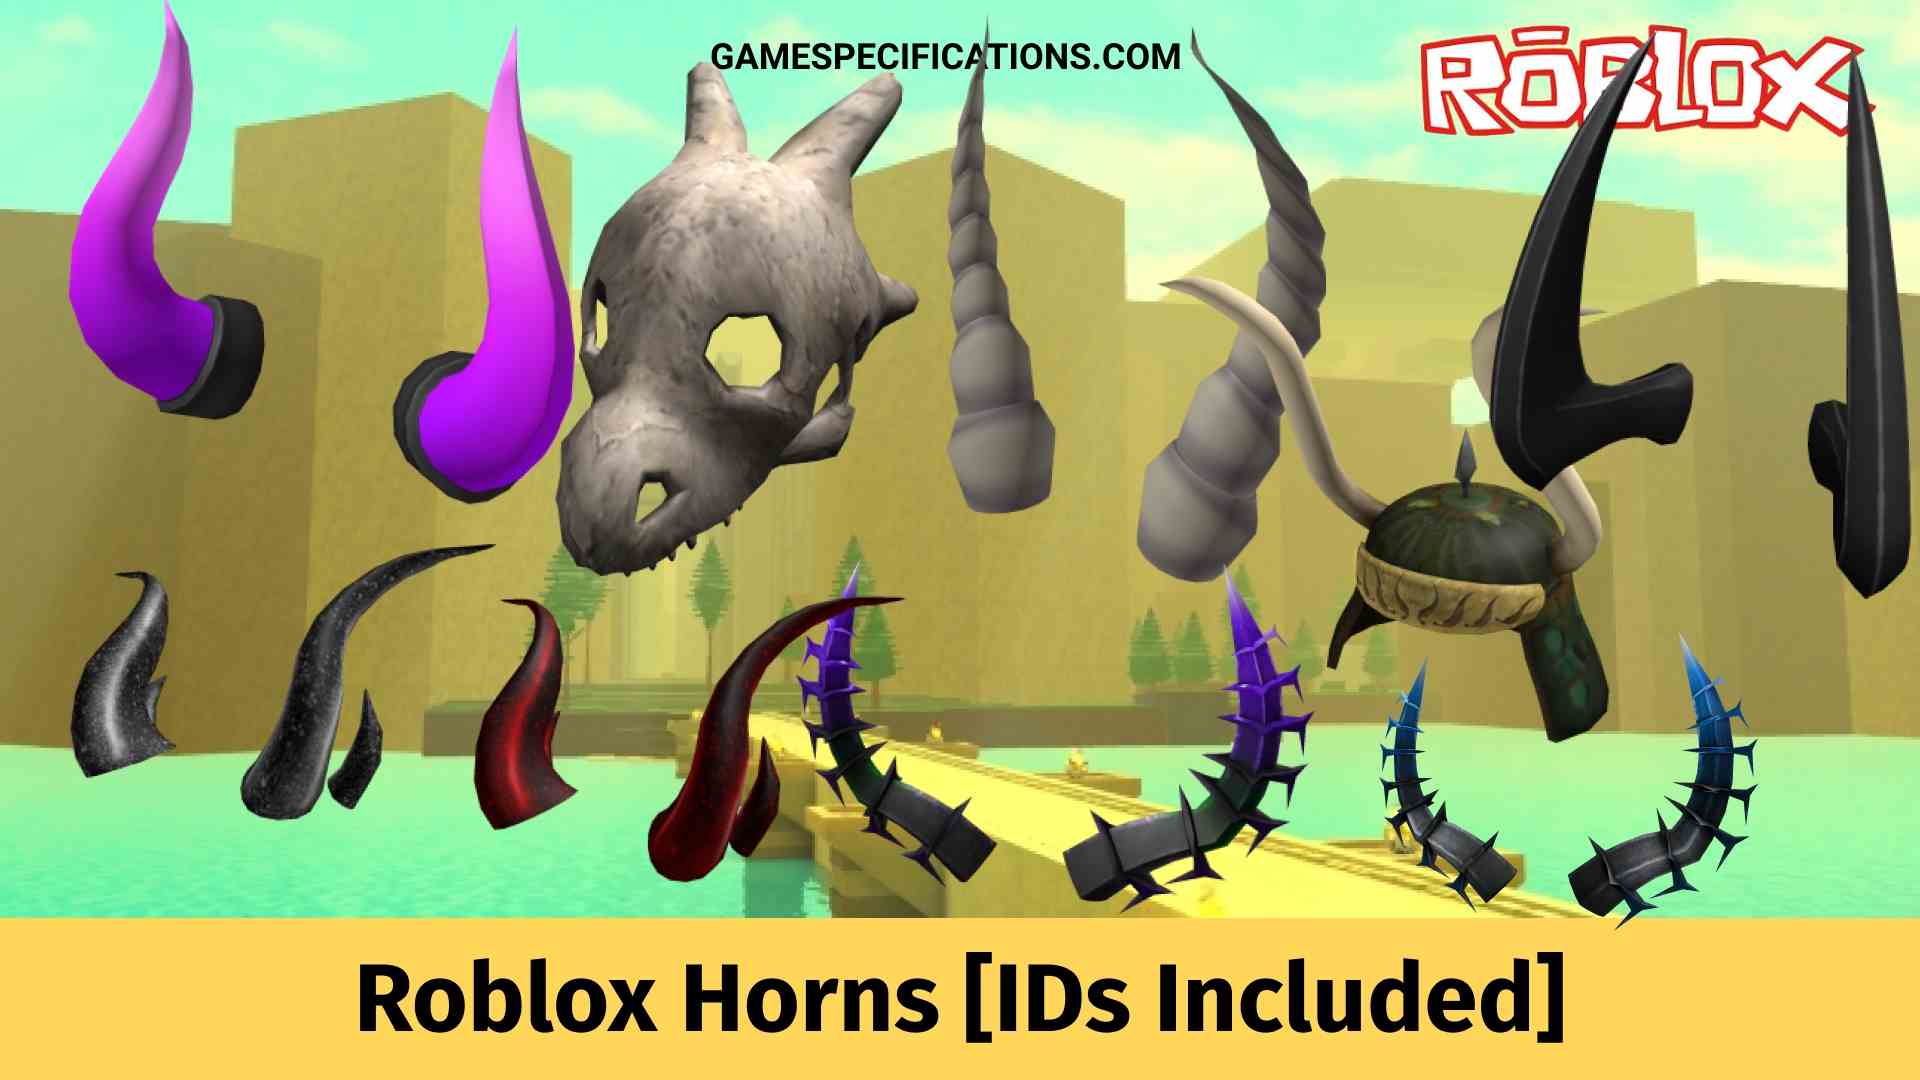 23 Roblox Horns To Awesome Devilish Look Ids Included Game Specifications - black horns roblox id